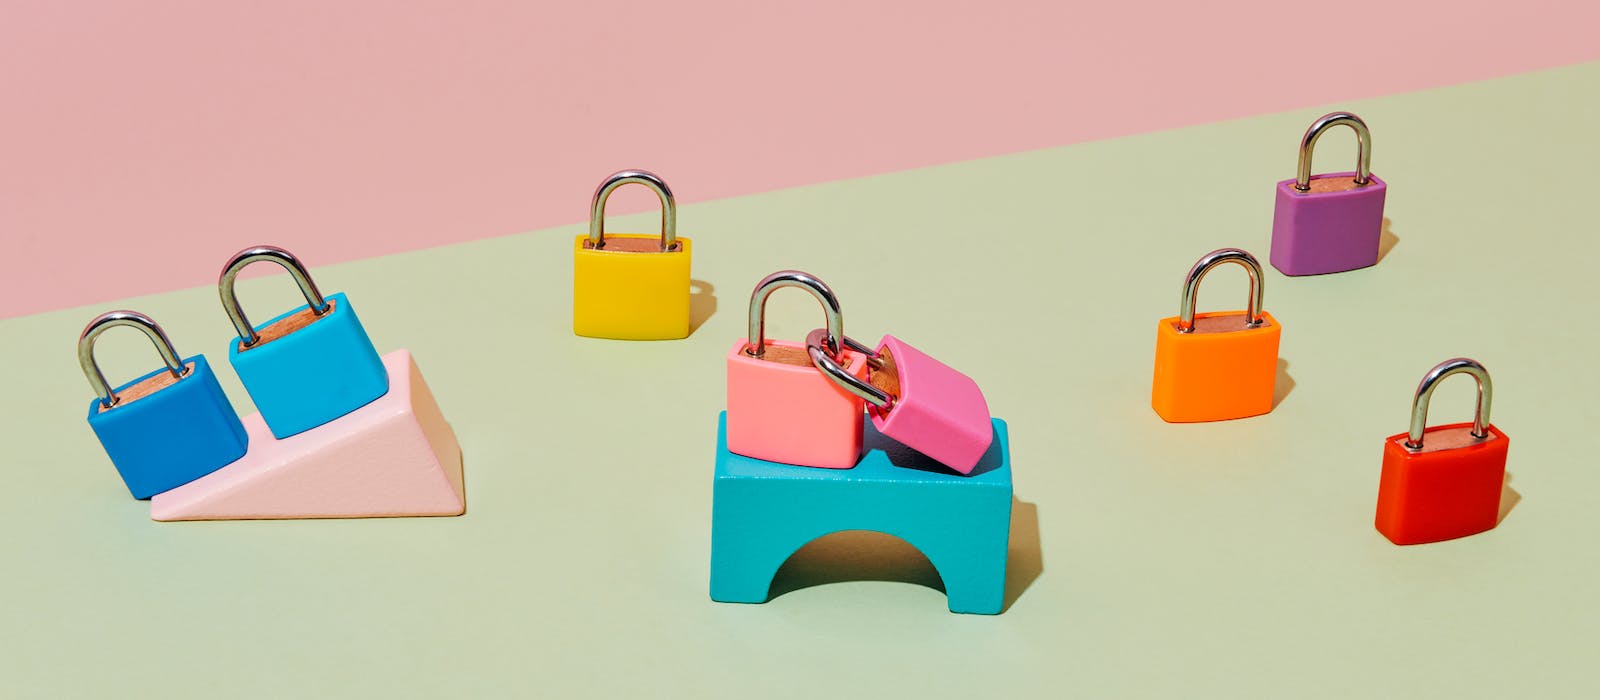 Eight randomly placed locked padlocks of different colors, some of them on top of different building blocks, on a pale green surface, against a pale pink background.